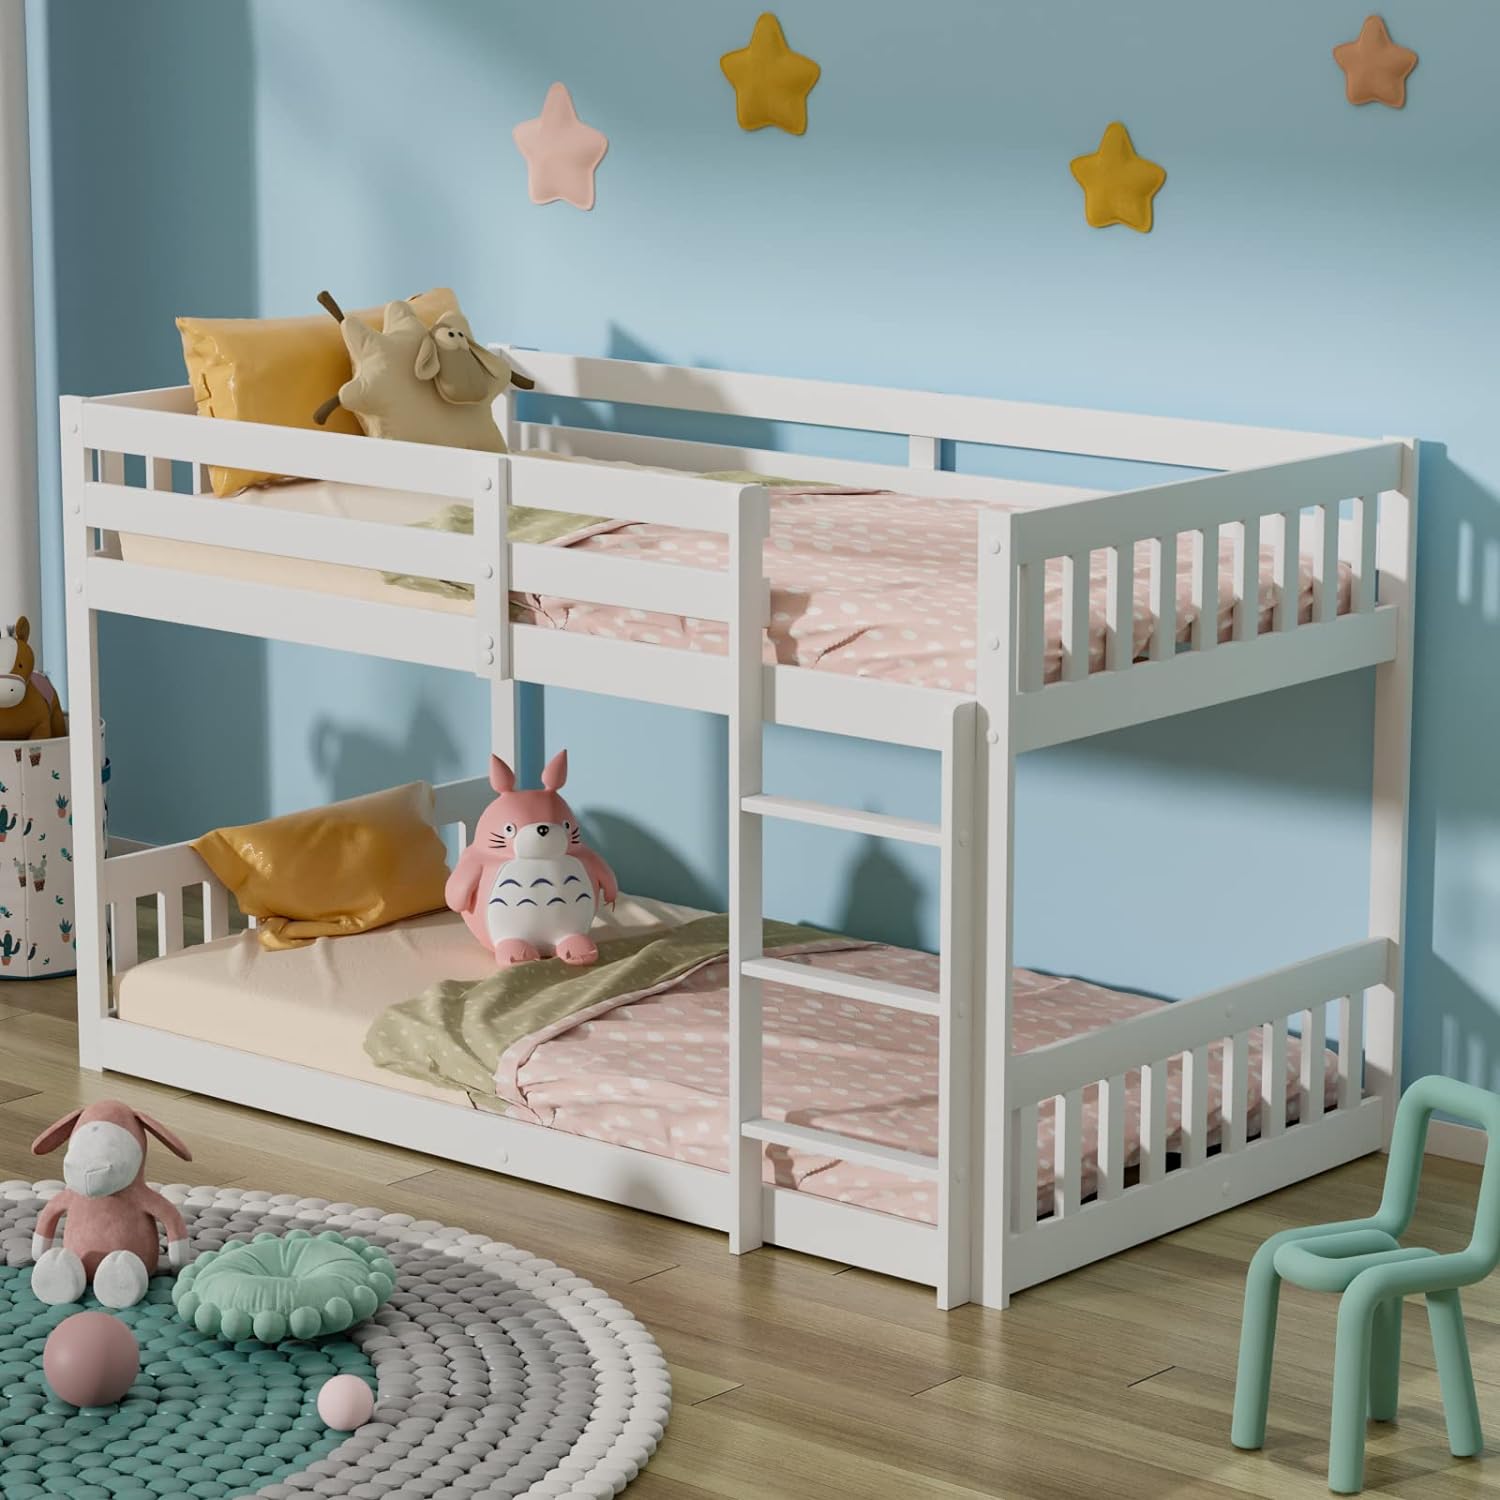 The Ultimate Space-Saving White Bunk Bed for Small Rooms